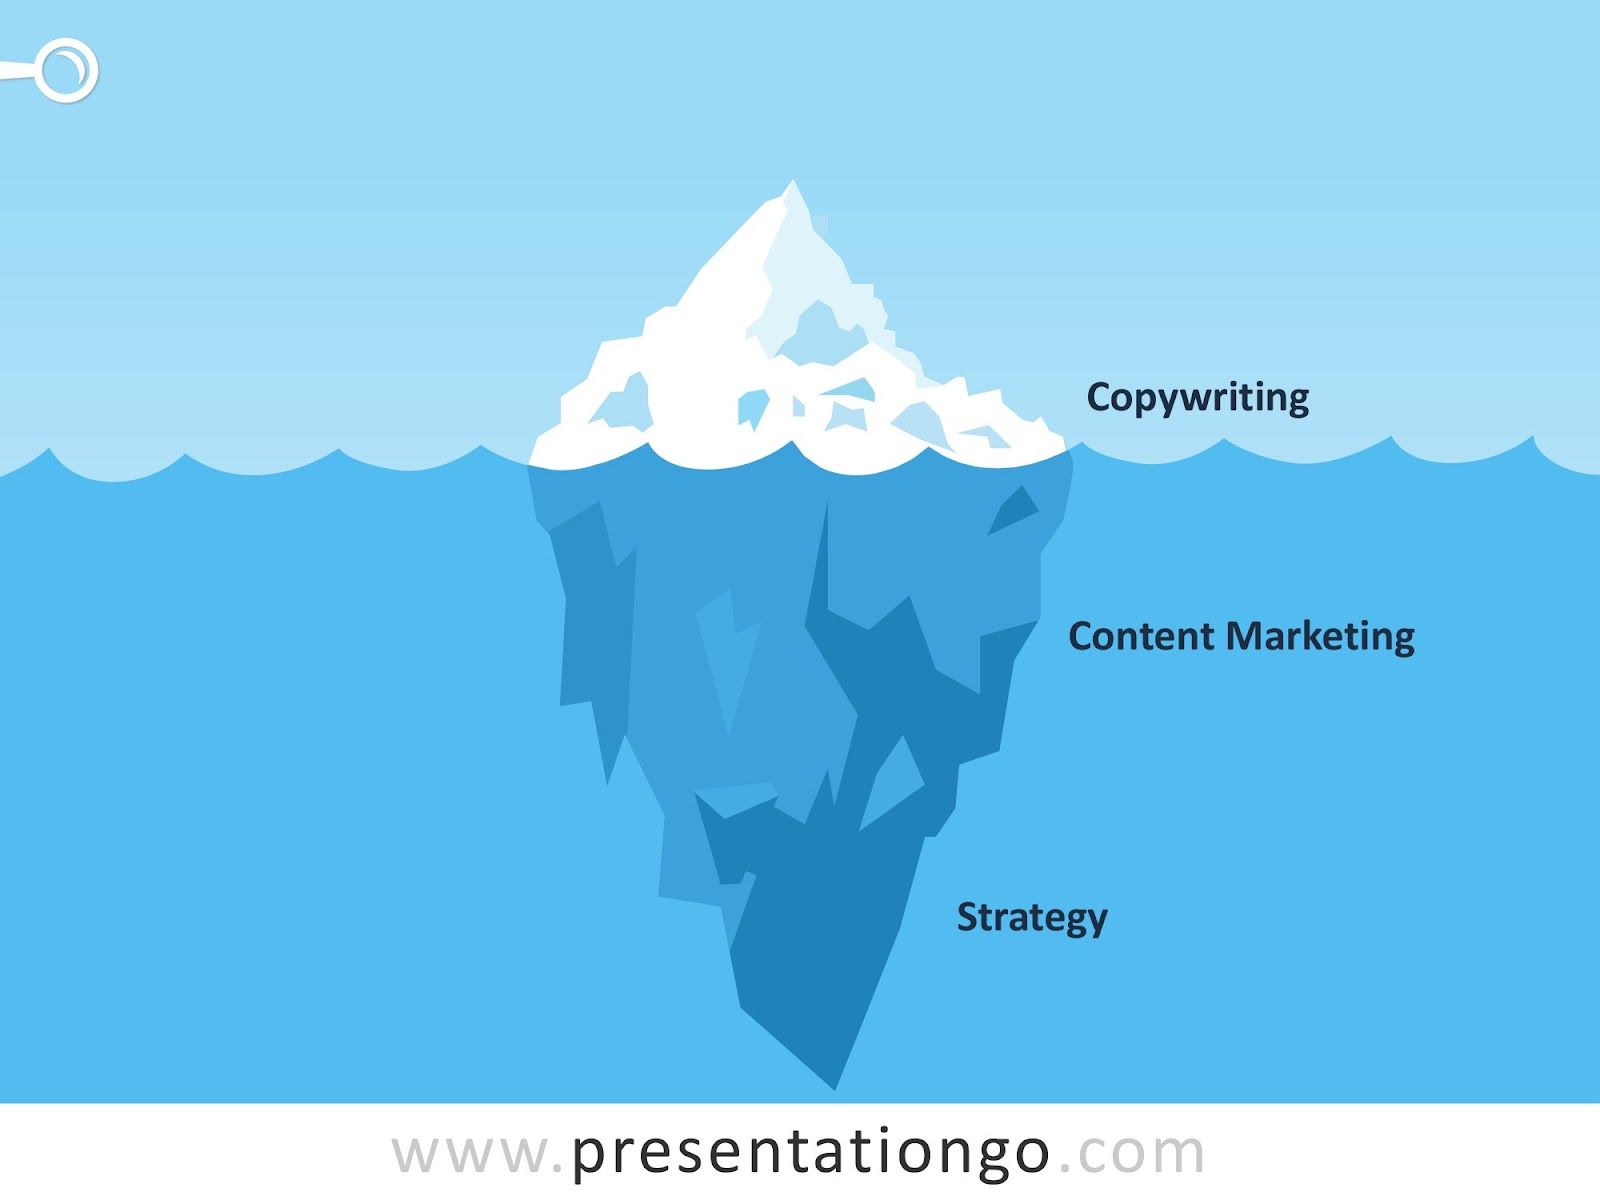 Tip of the iceberg is copywriting, middle is content marketing, and bottom is strategy